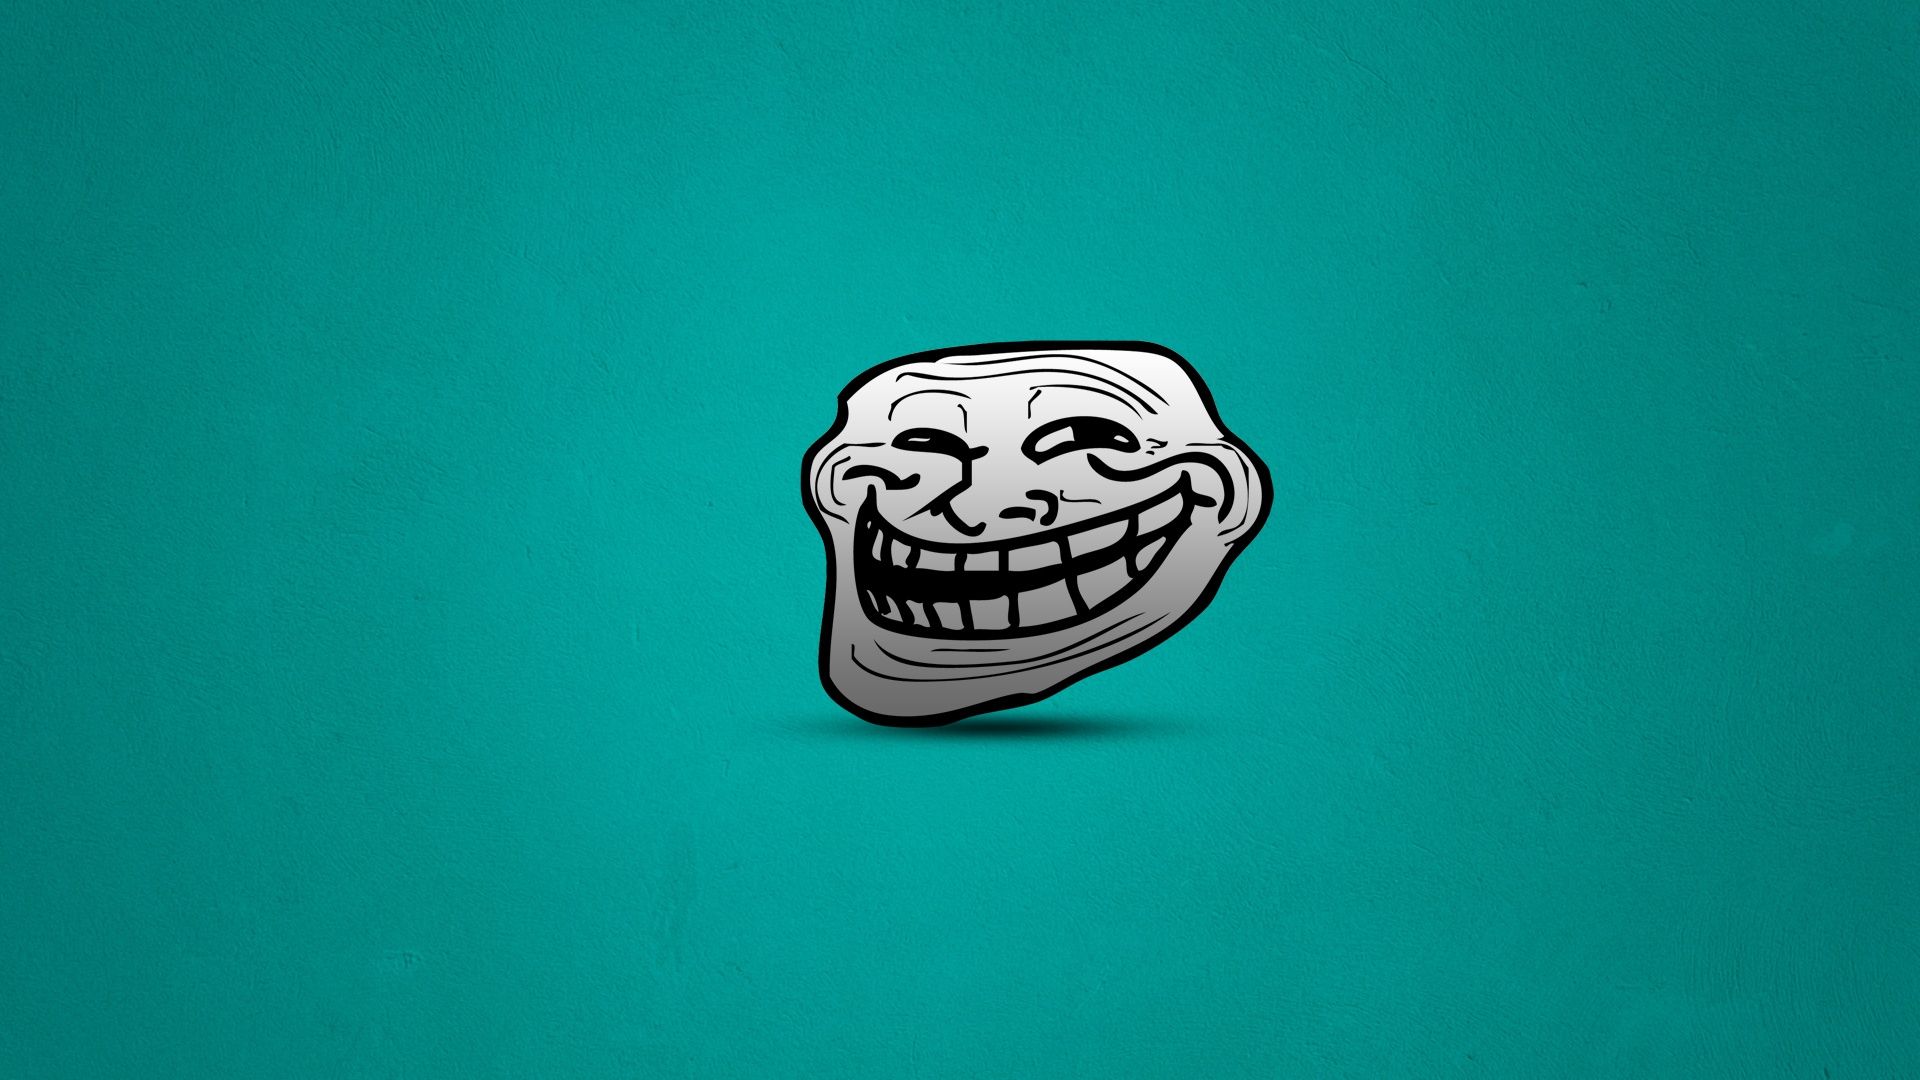 funny troll face uhd wallpapers - Ultra High Definition Wallpapers ...